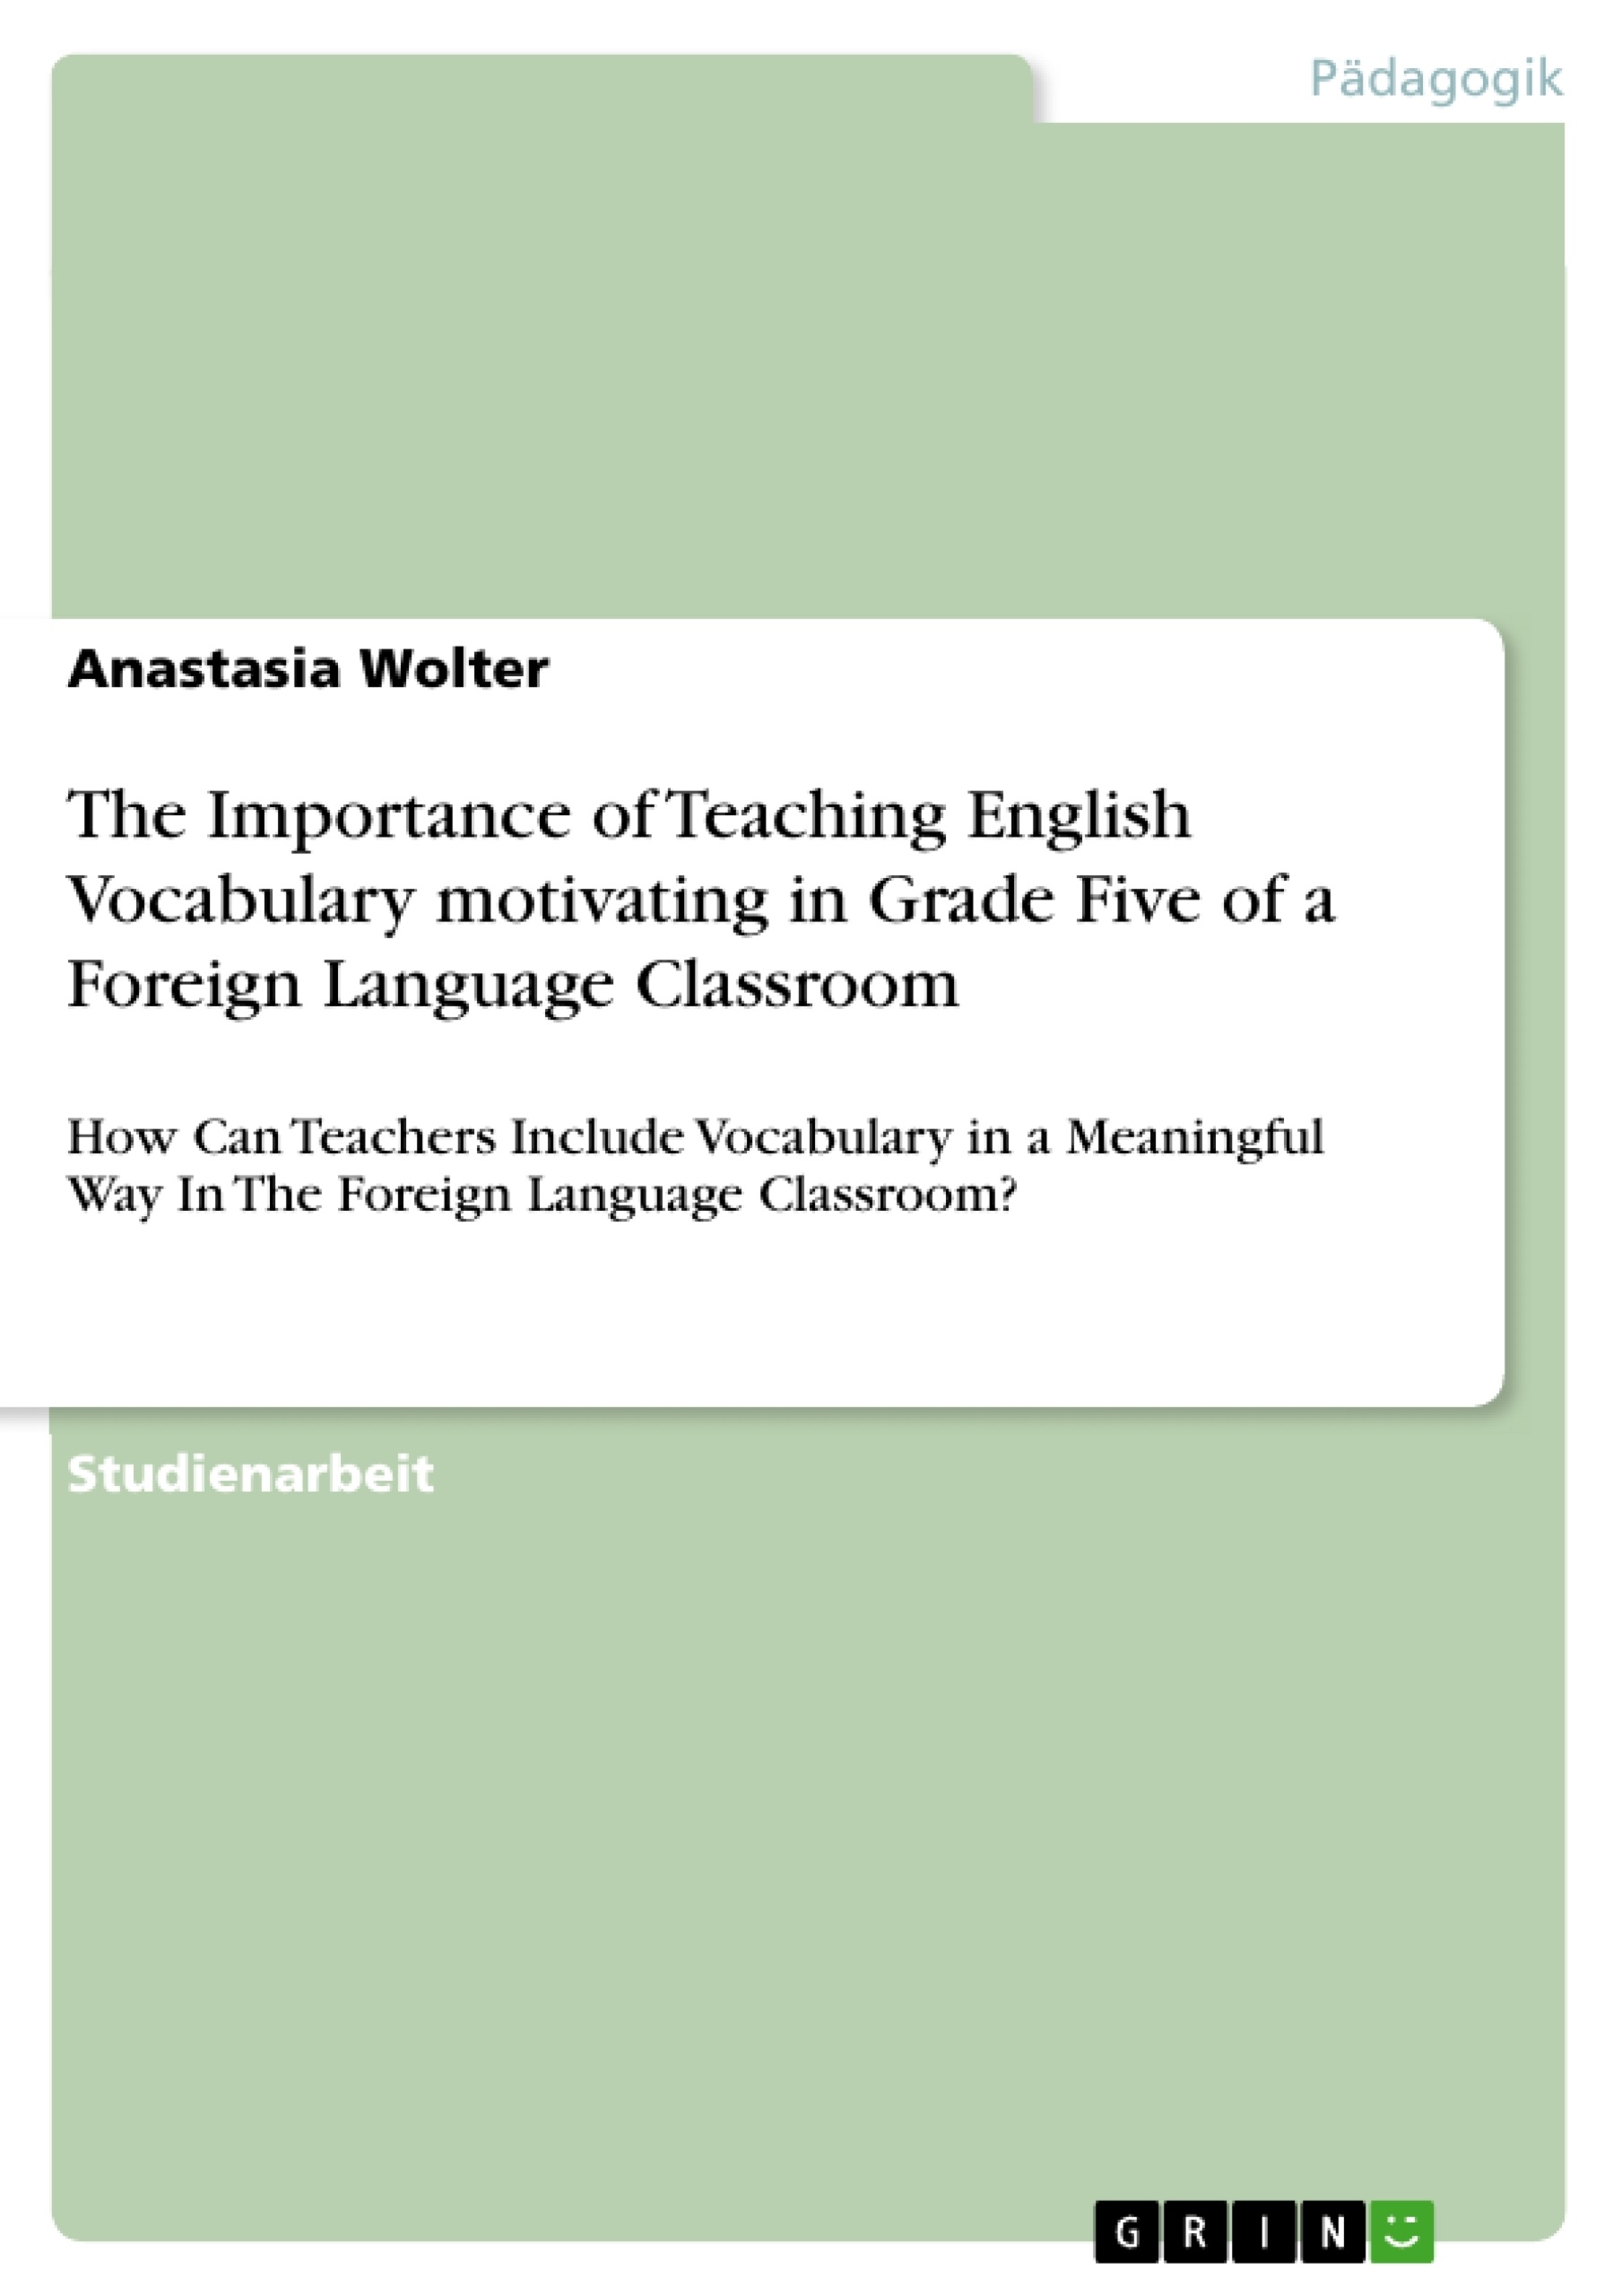 why is teaching vocabulary important